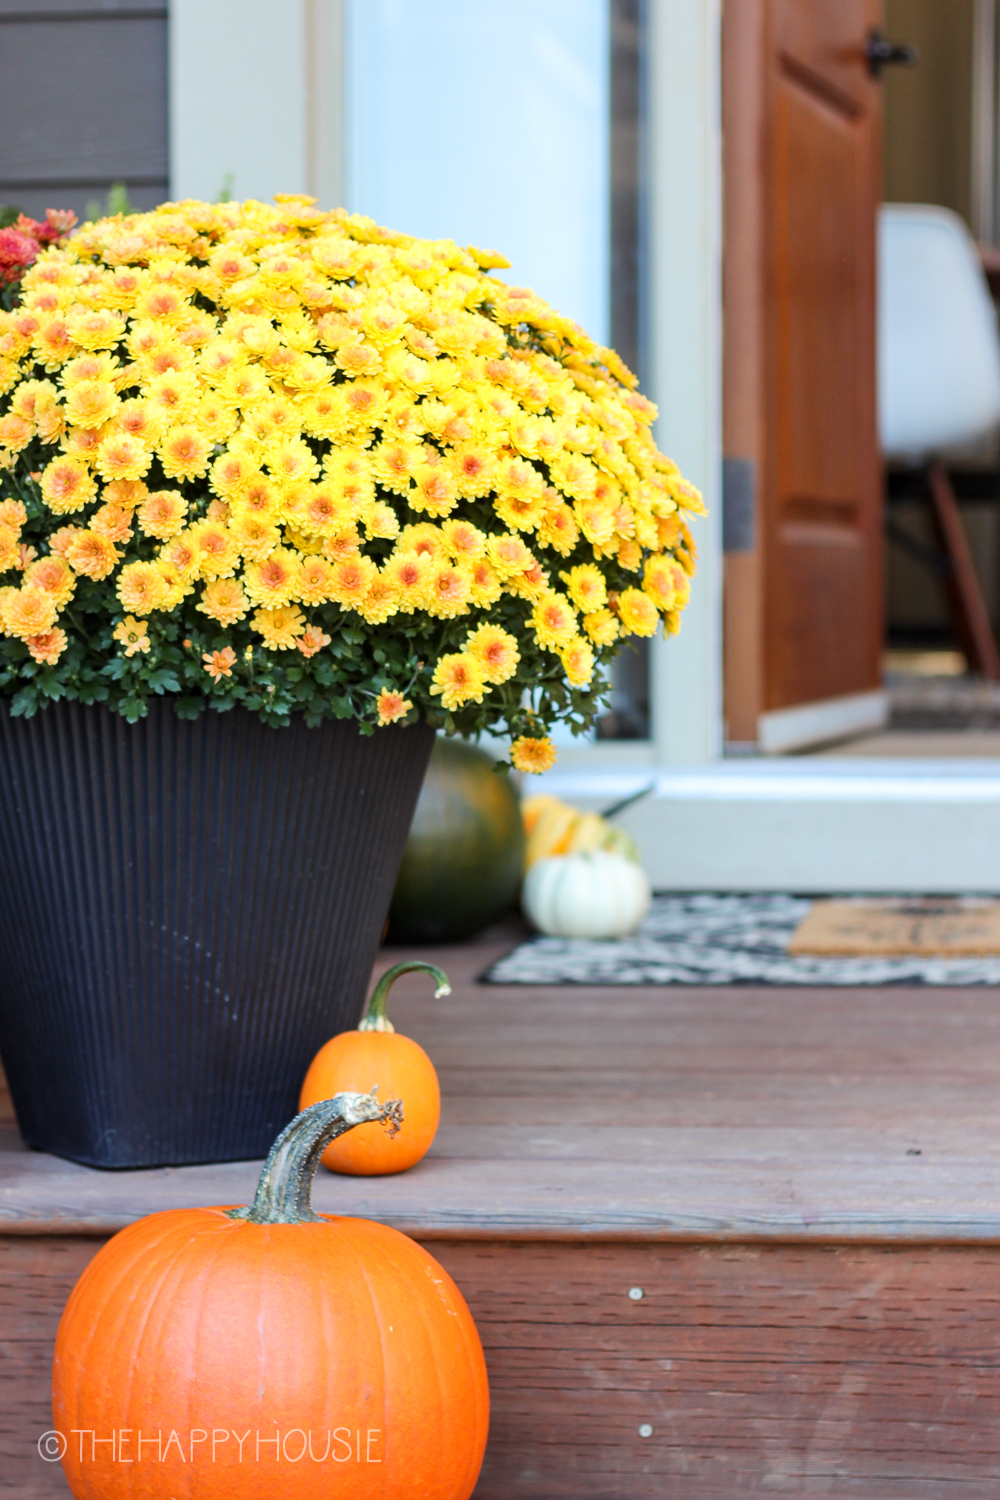 A pot filled with yellow bright flowers on the porch.